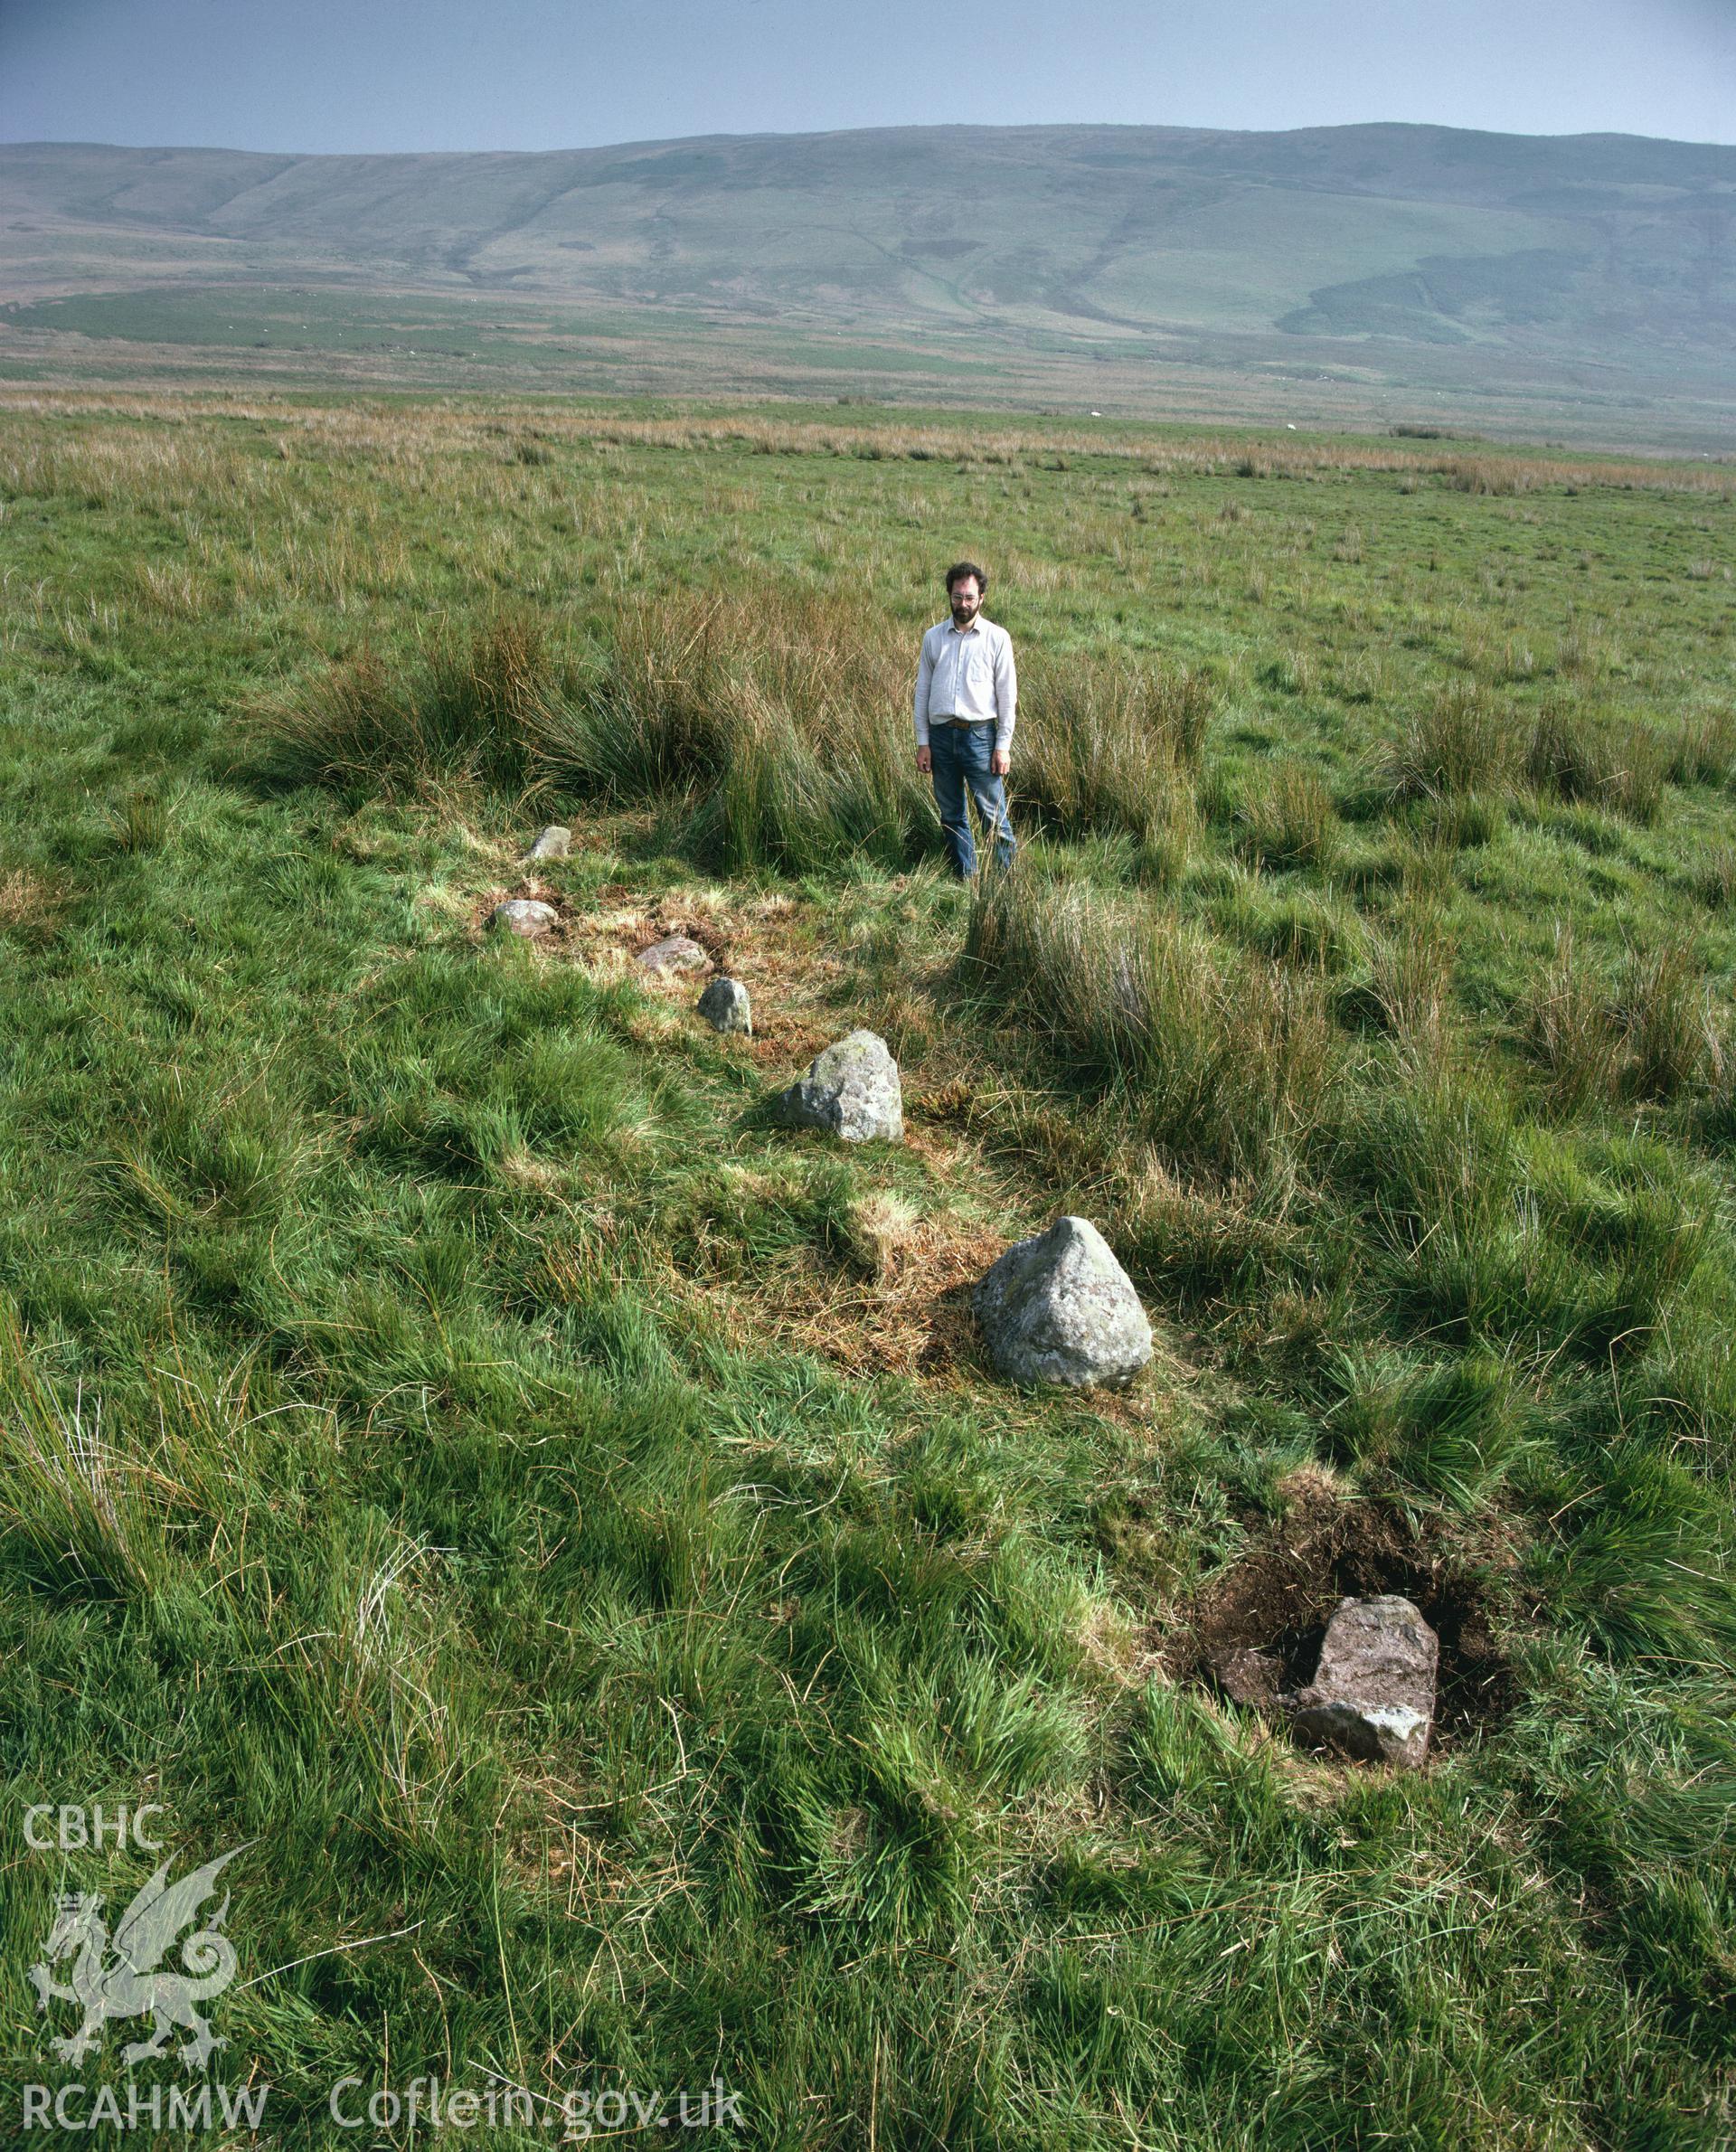 RCAHMW colour transparency showing stone alignment at Saith Maen, taken by Iain Wright, c.1981